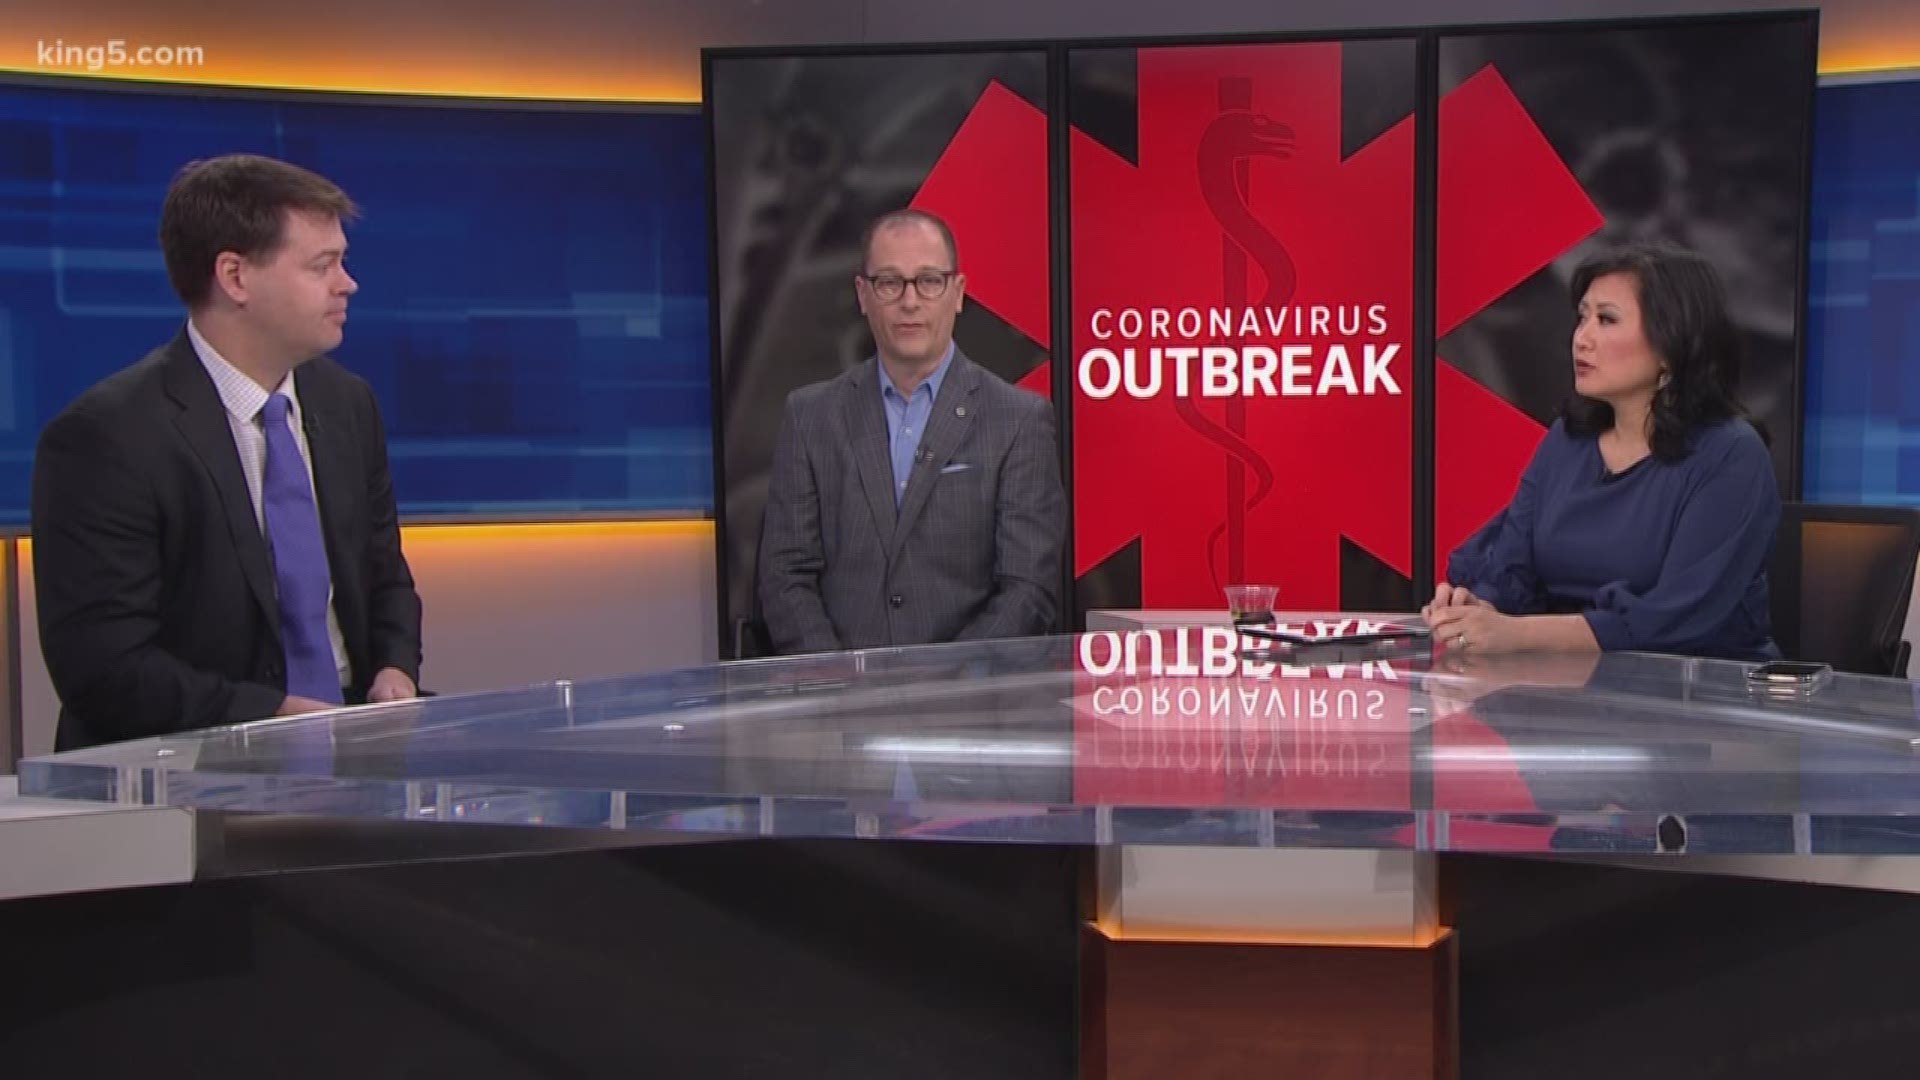 Virologist Dr. Alex Greninger explains what a coronavirus is and addresses some of our concerns with the new outbreak.